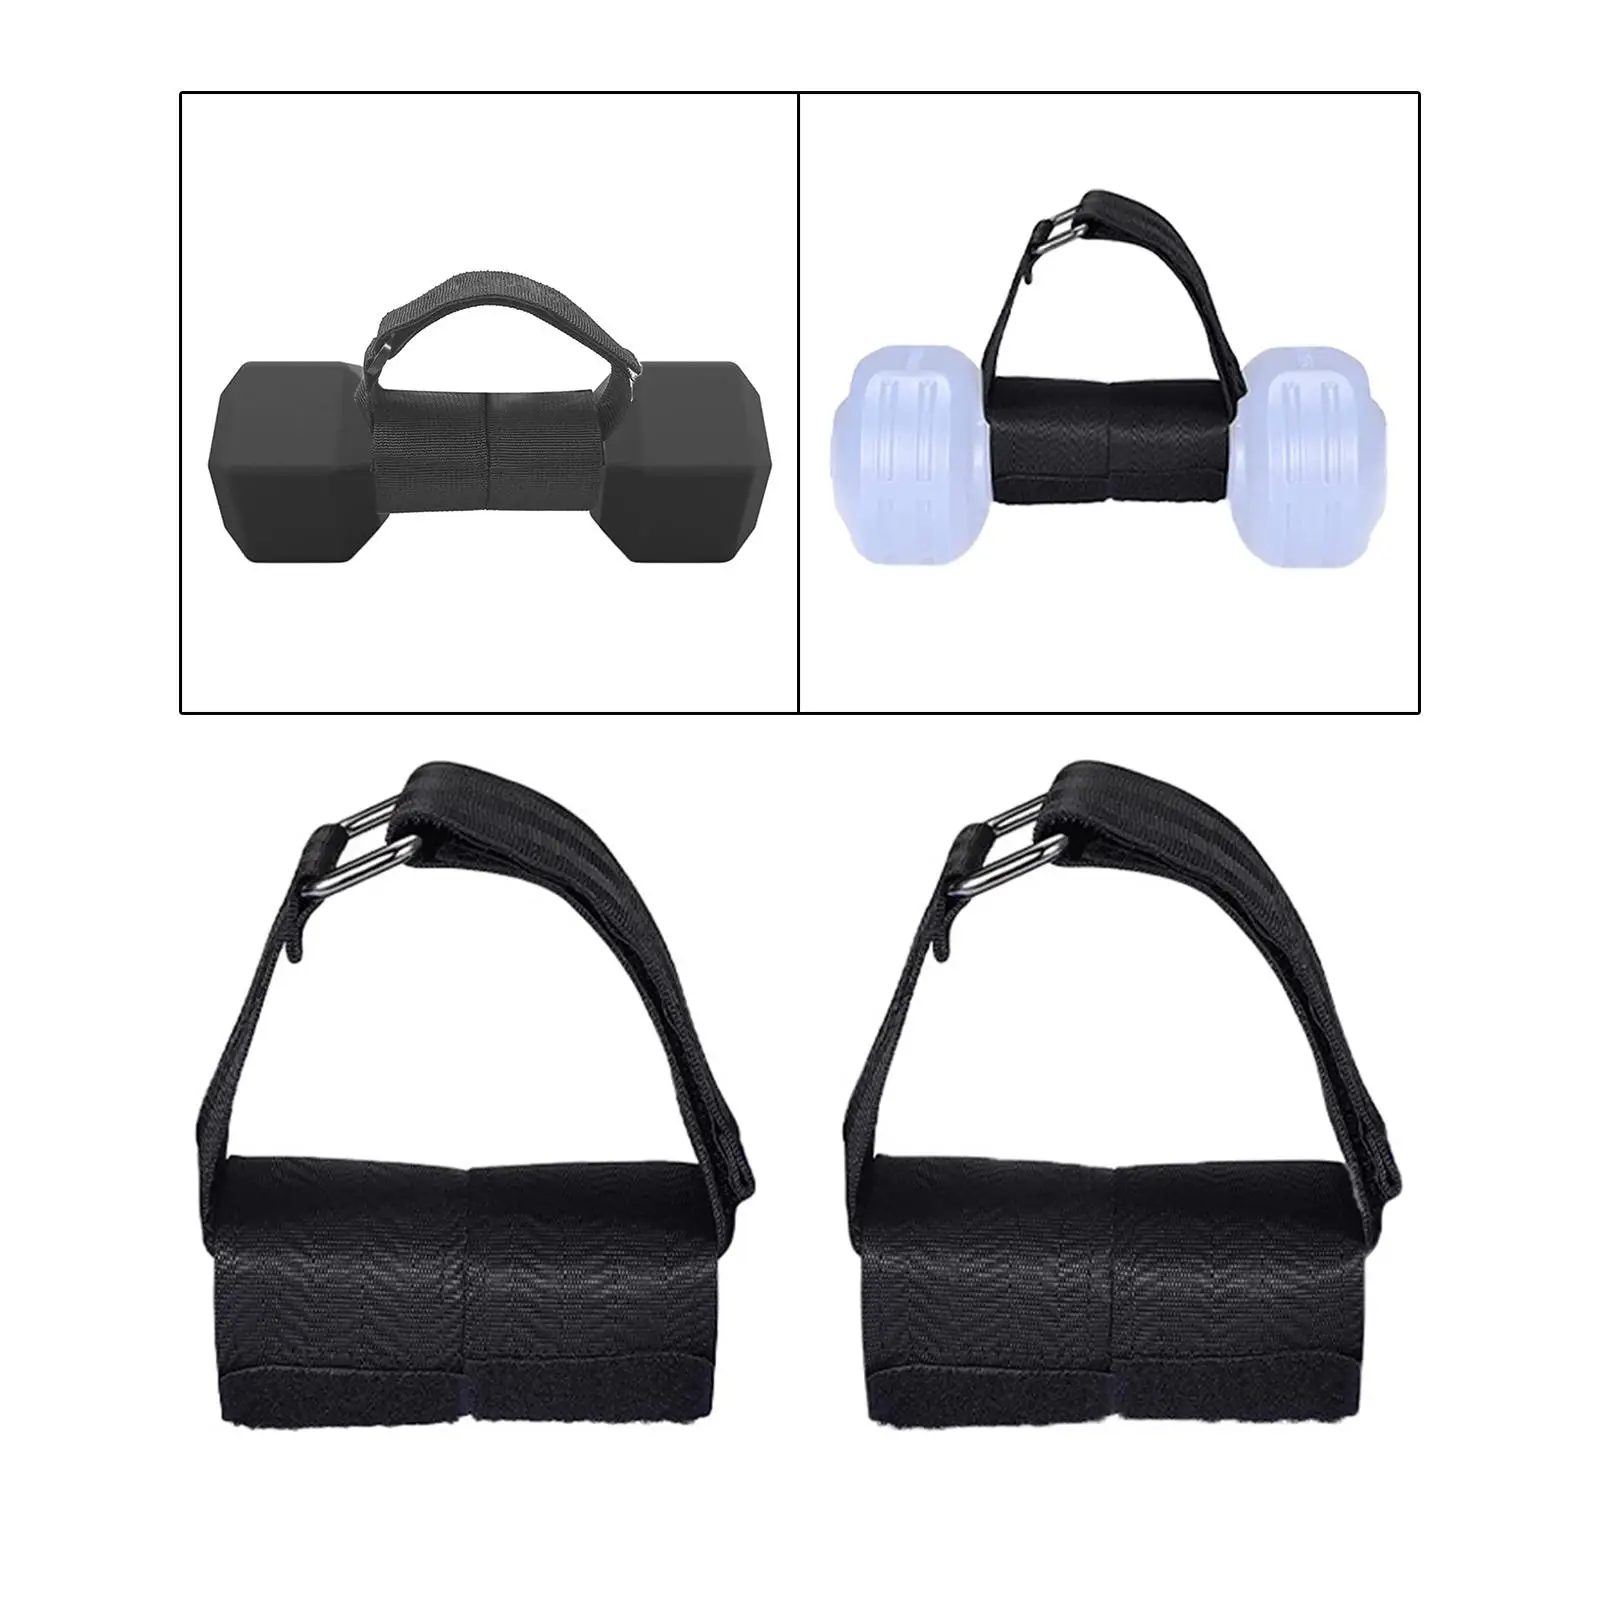 2Pcs Adjustable Weight Dumbbell Ankle Straps Durable Dumbbell Attachment for Equipment Bodybuilding Exerciser Gym Training